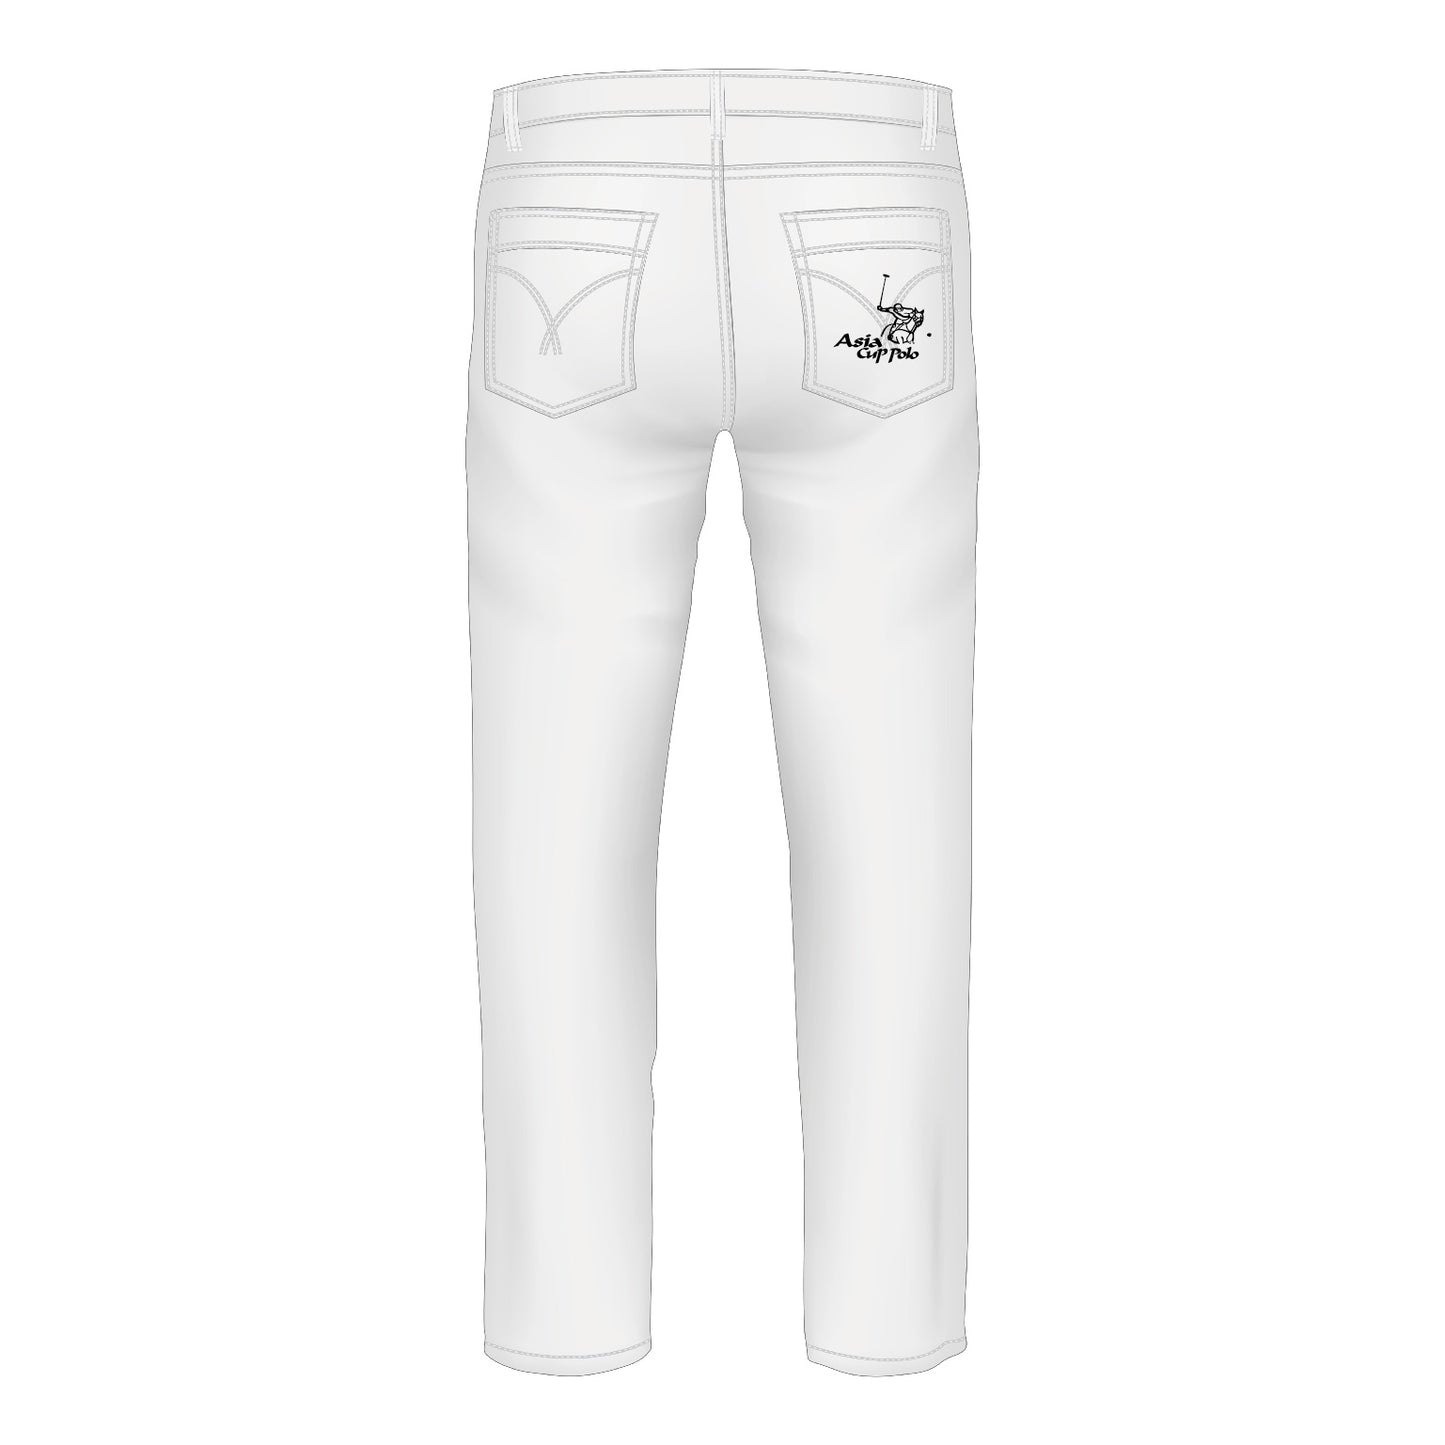 Asia Cup White Jeans